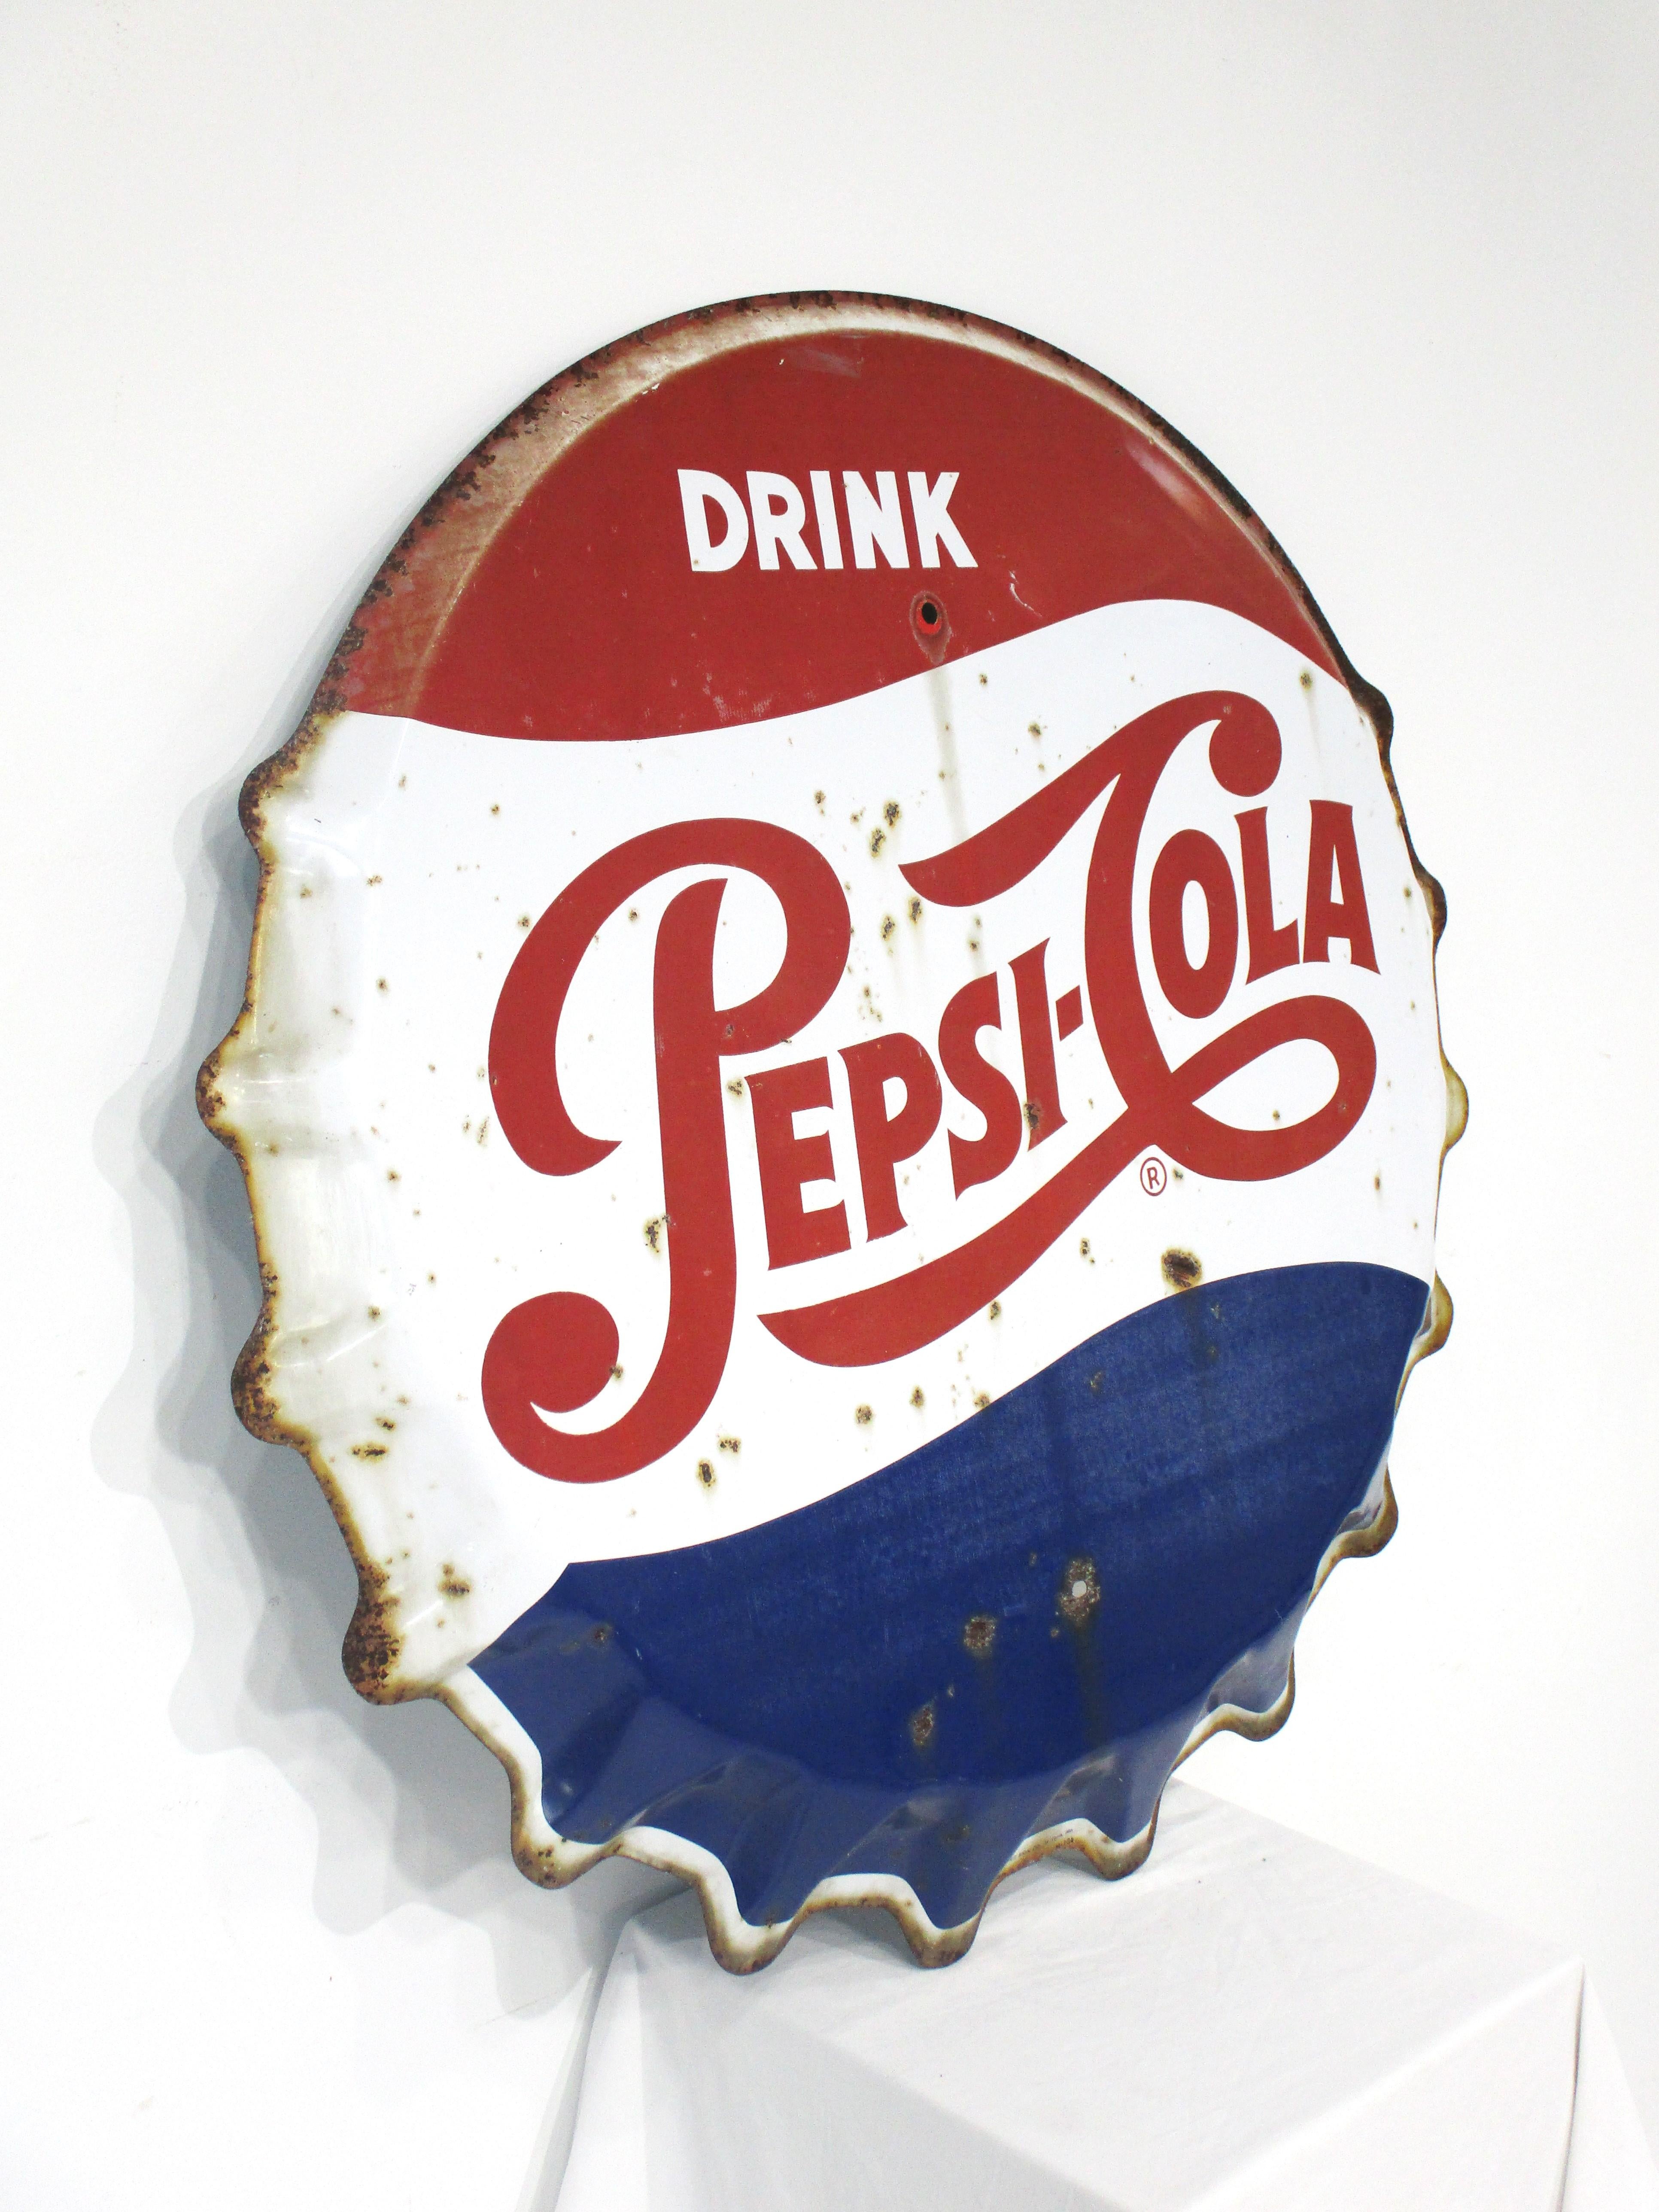 A large sized vintage metal formed pressed bottle cap sign painted in the red, white and blue colors of the Pepsi Cola soft drink company . Found in a barn in Maine with great patina giving the piece a rustic and folk art look . Manufactured by the